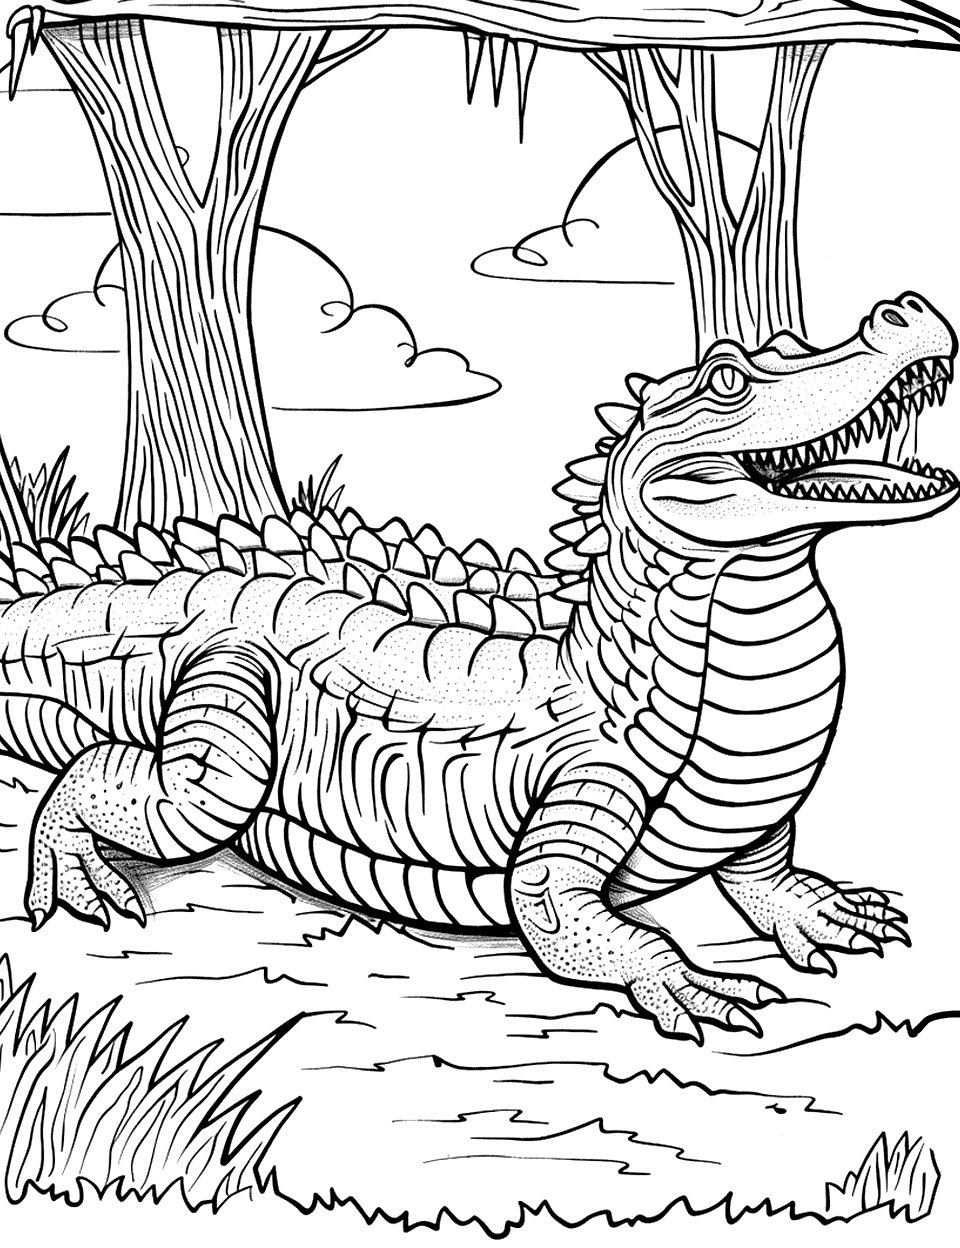 Monster Crocodile Myth Coloring Page - A mythical crocodile standing in a mystical forest.